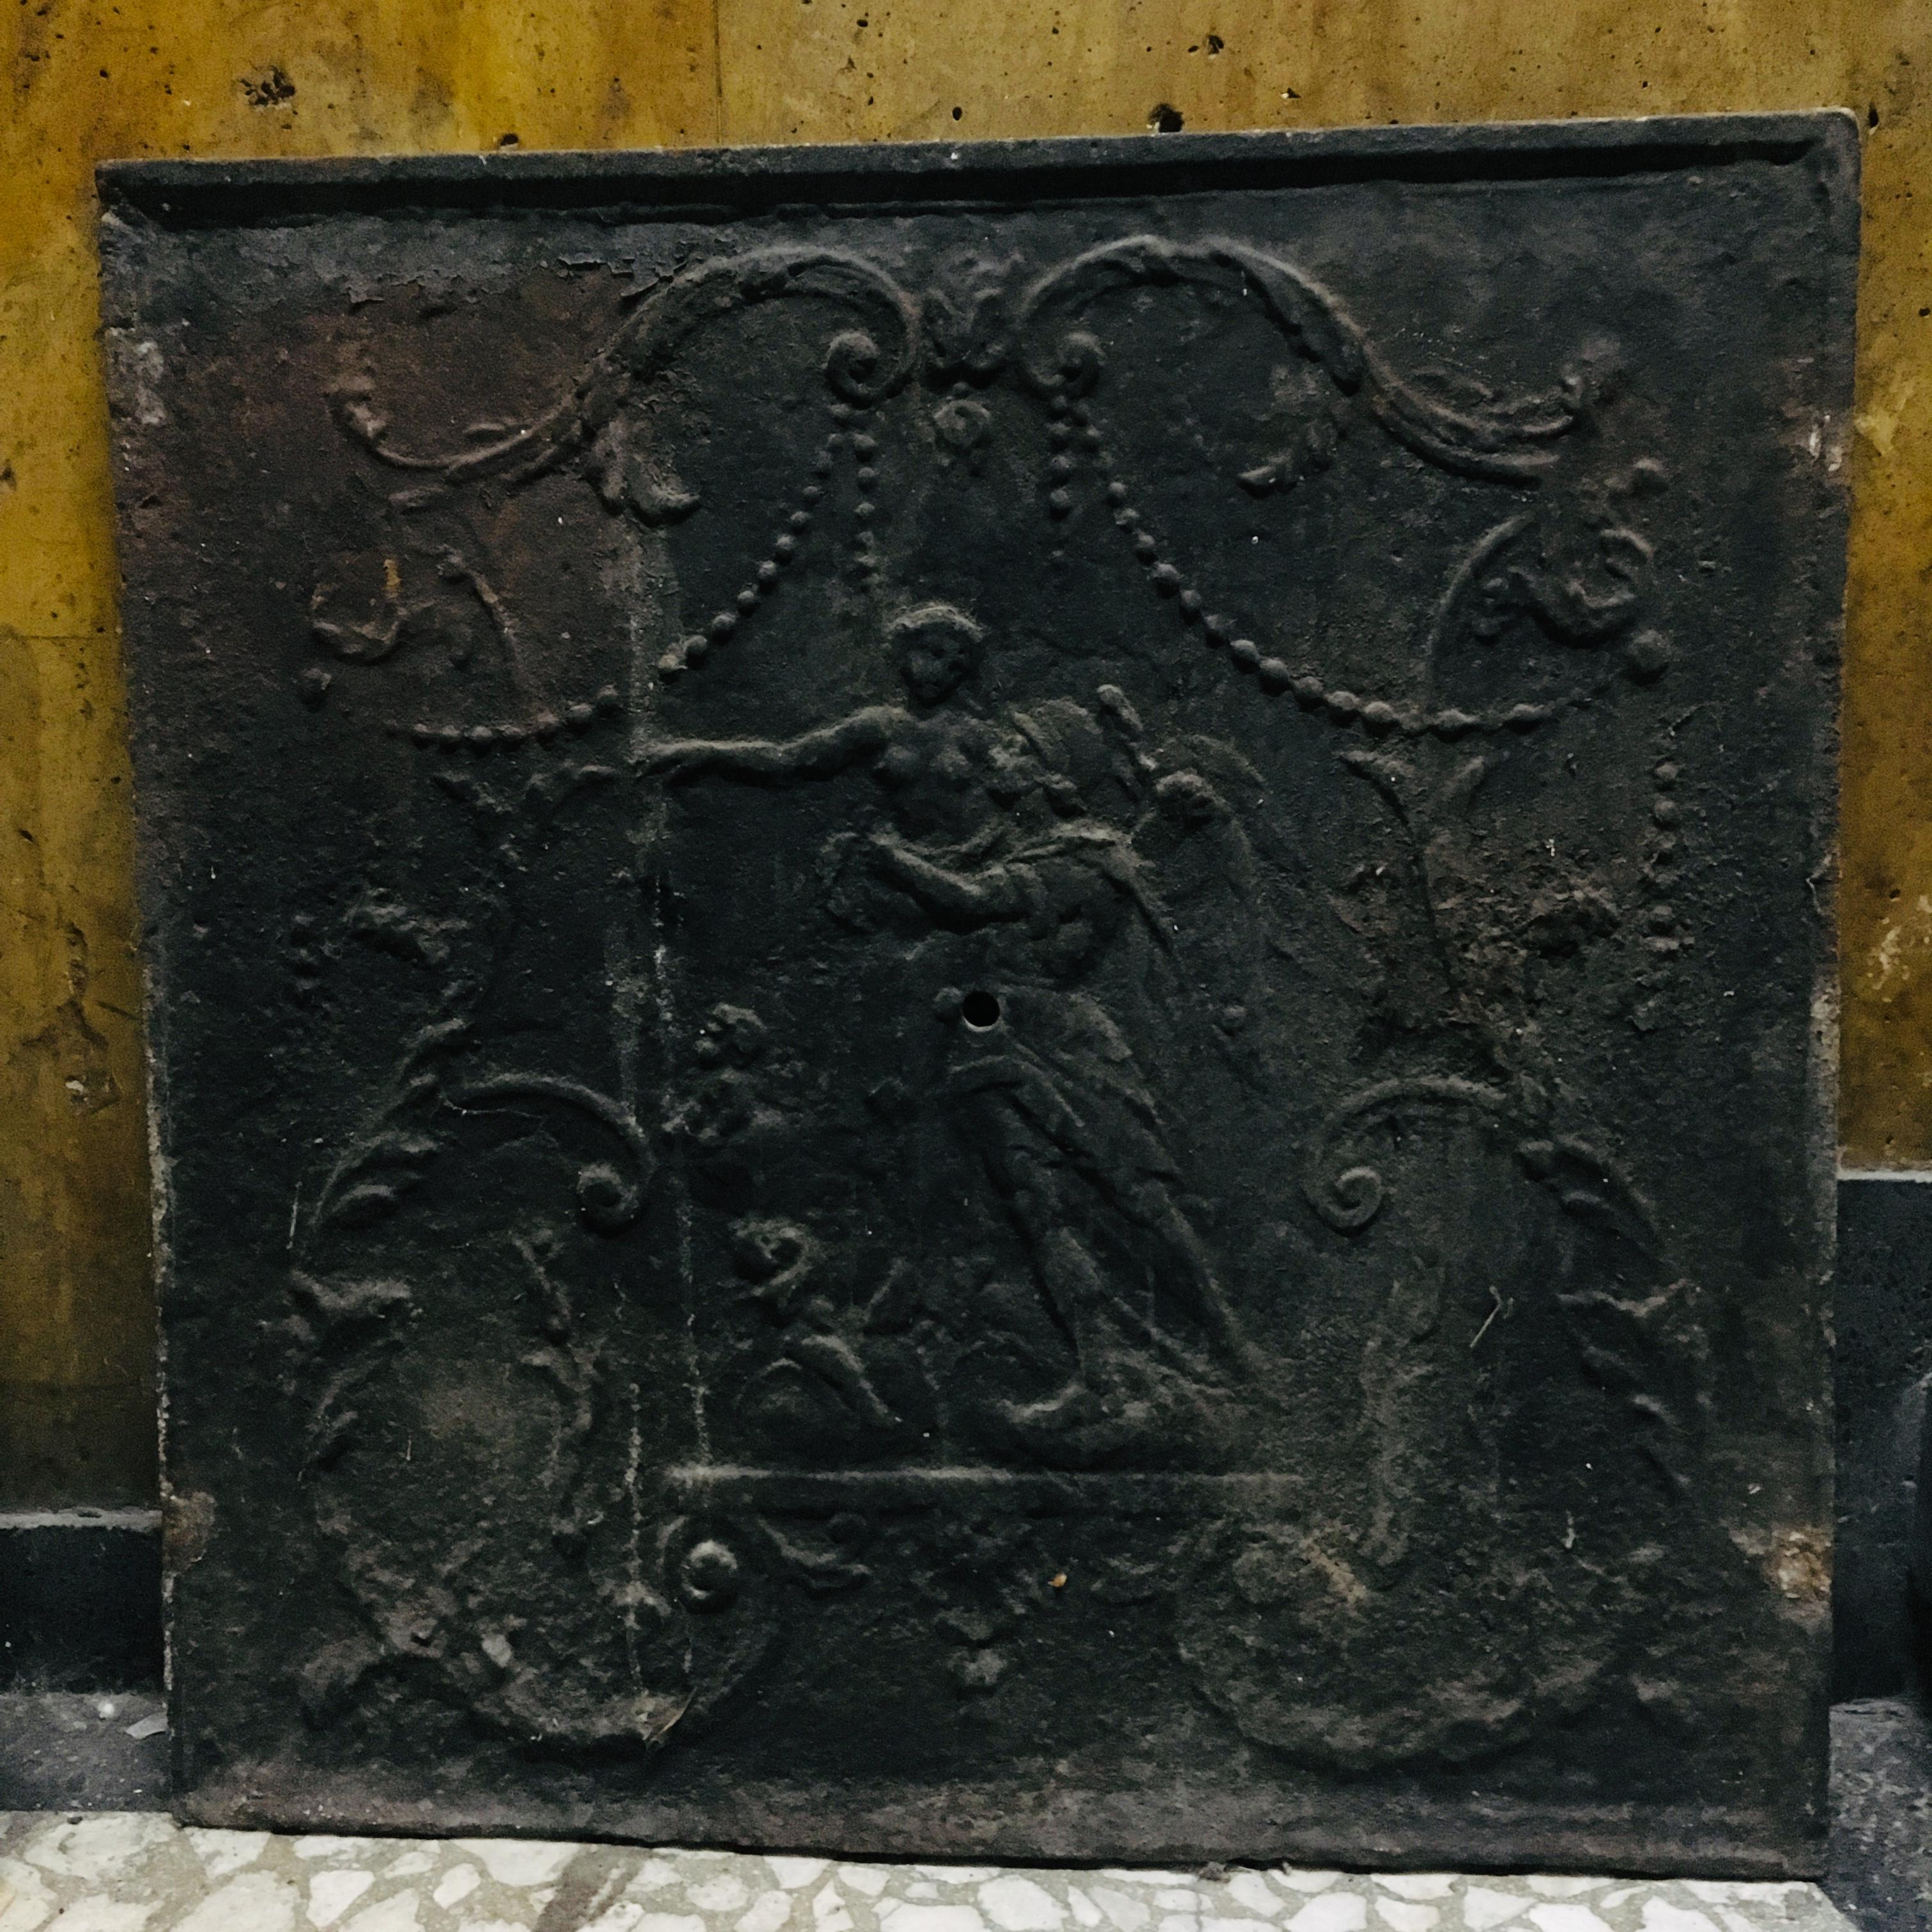 This antique iron fire back plaque was crafted in France, circa 1760.
This forged piece could be used inside a fireplace hearth to re-direct heat, or as a back splash behind the stove in a kitchen. The rustic plaque has wonderful details